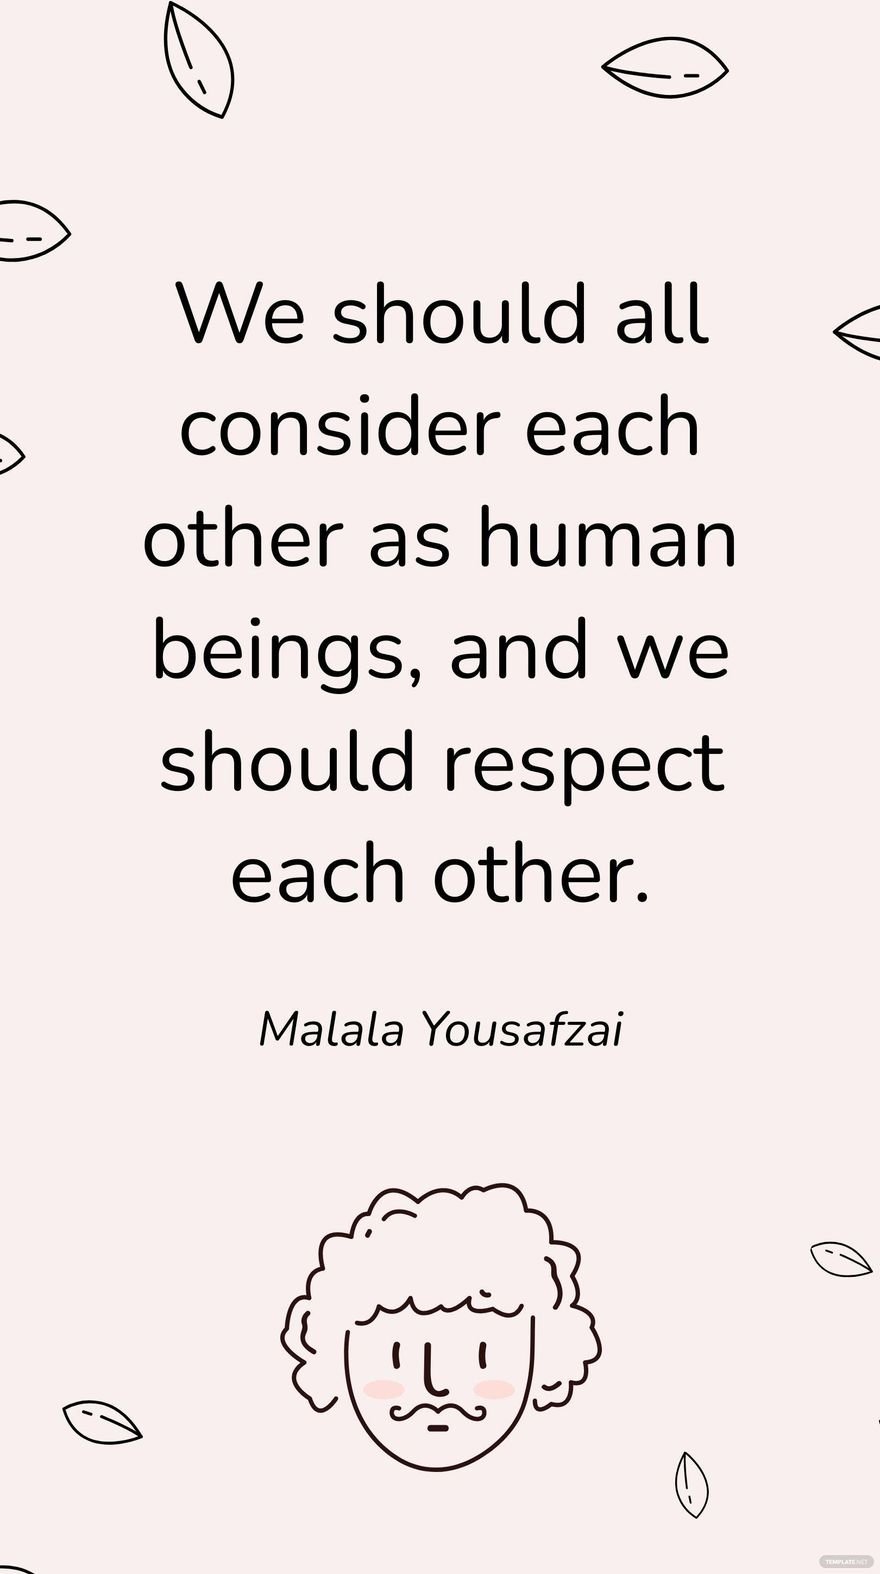 Malala Yousafzai - We should all consider each other as human beings, and we should respect each other.